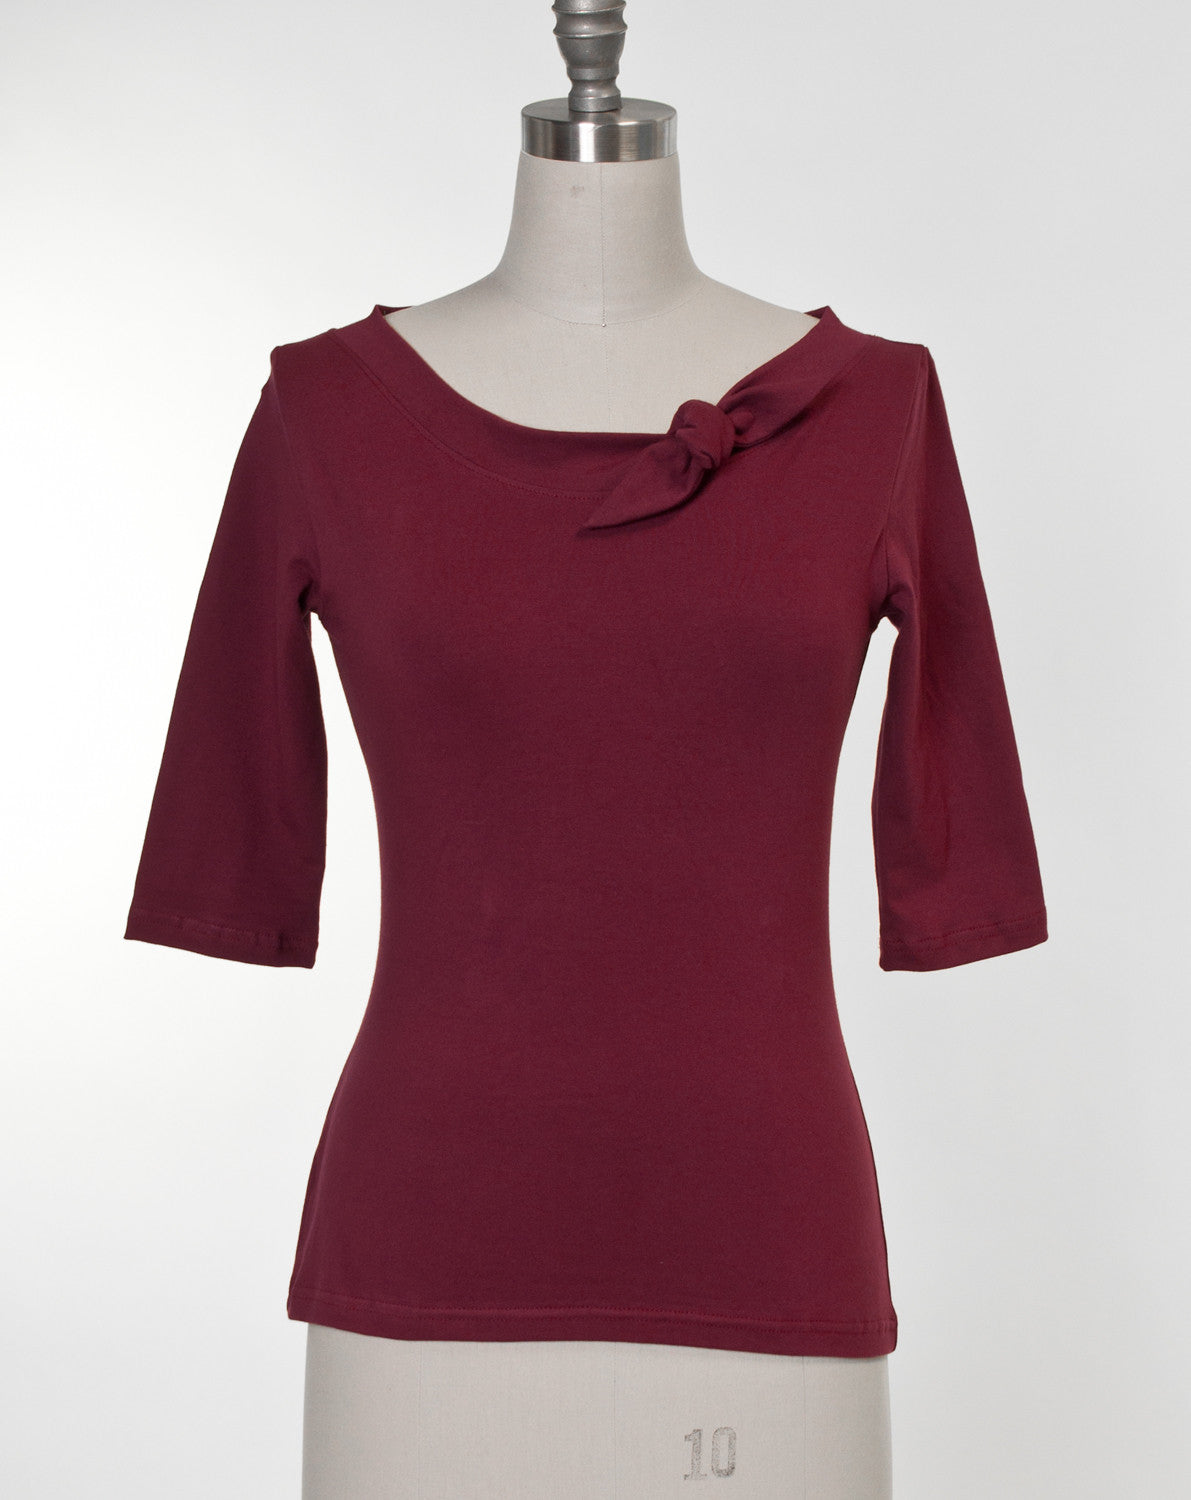 Lily Top - Burgundy - Heart of Haute